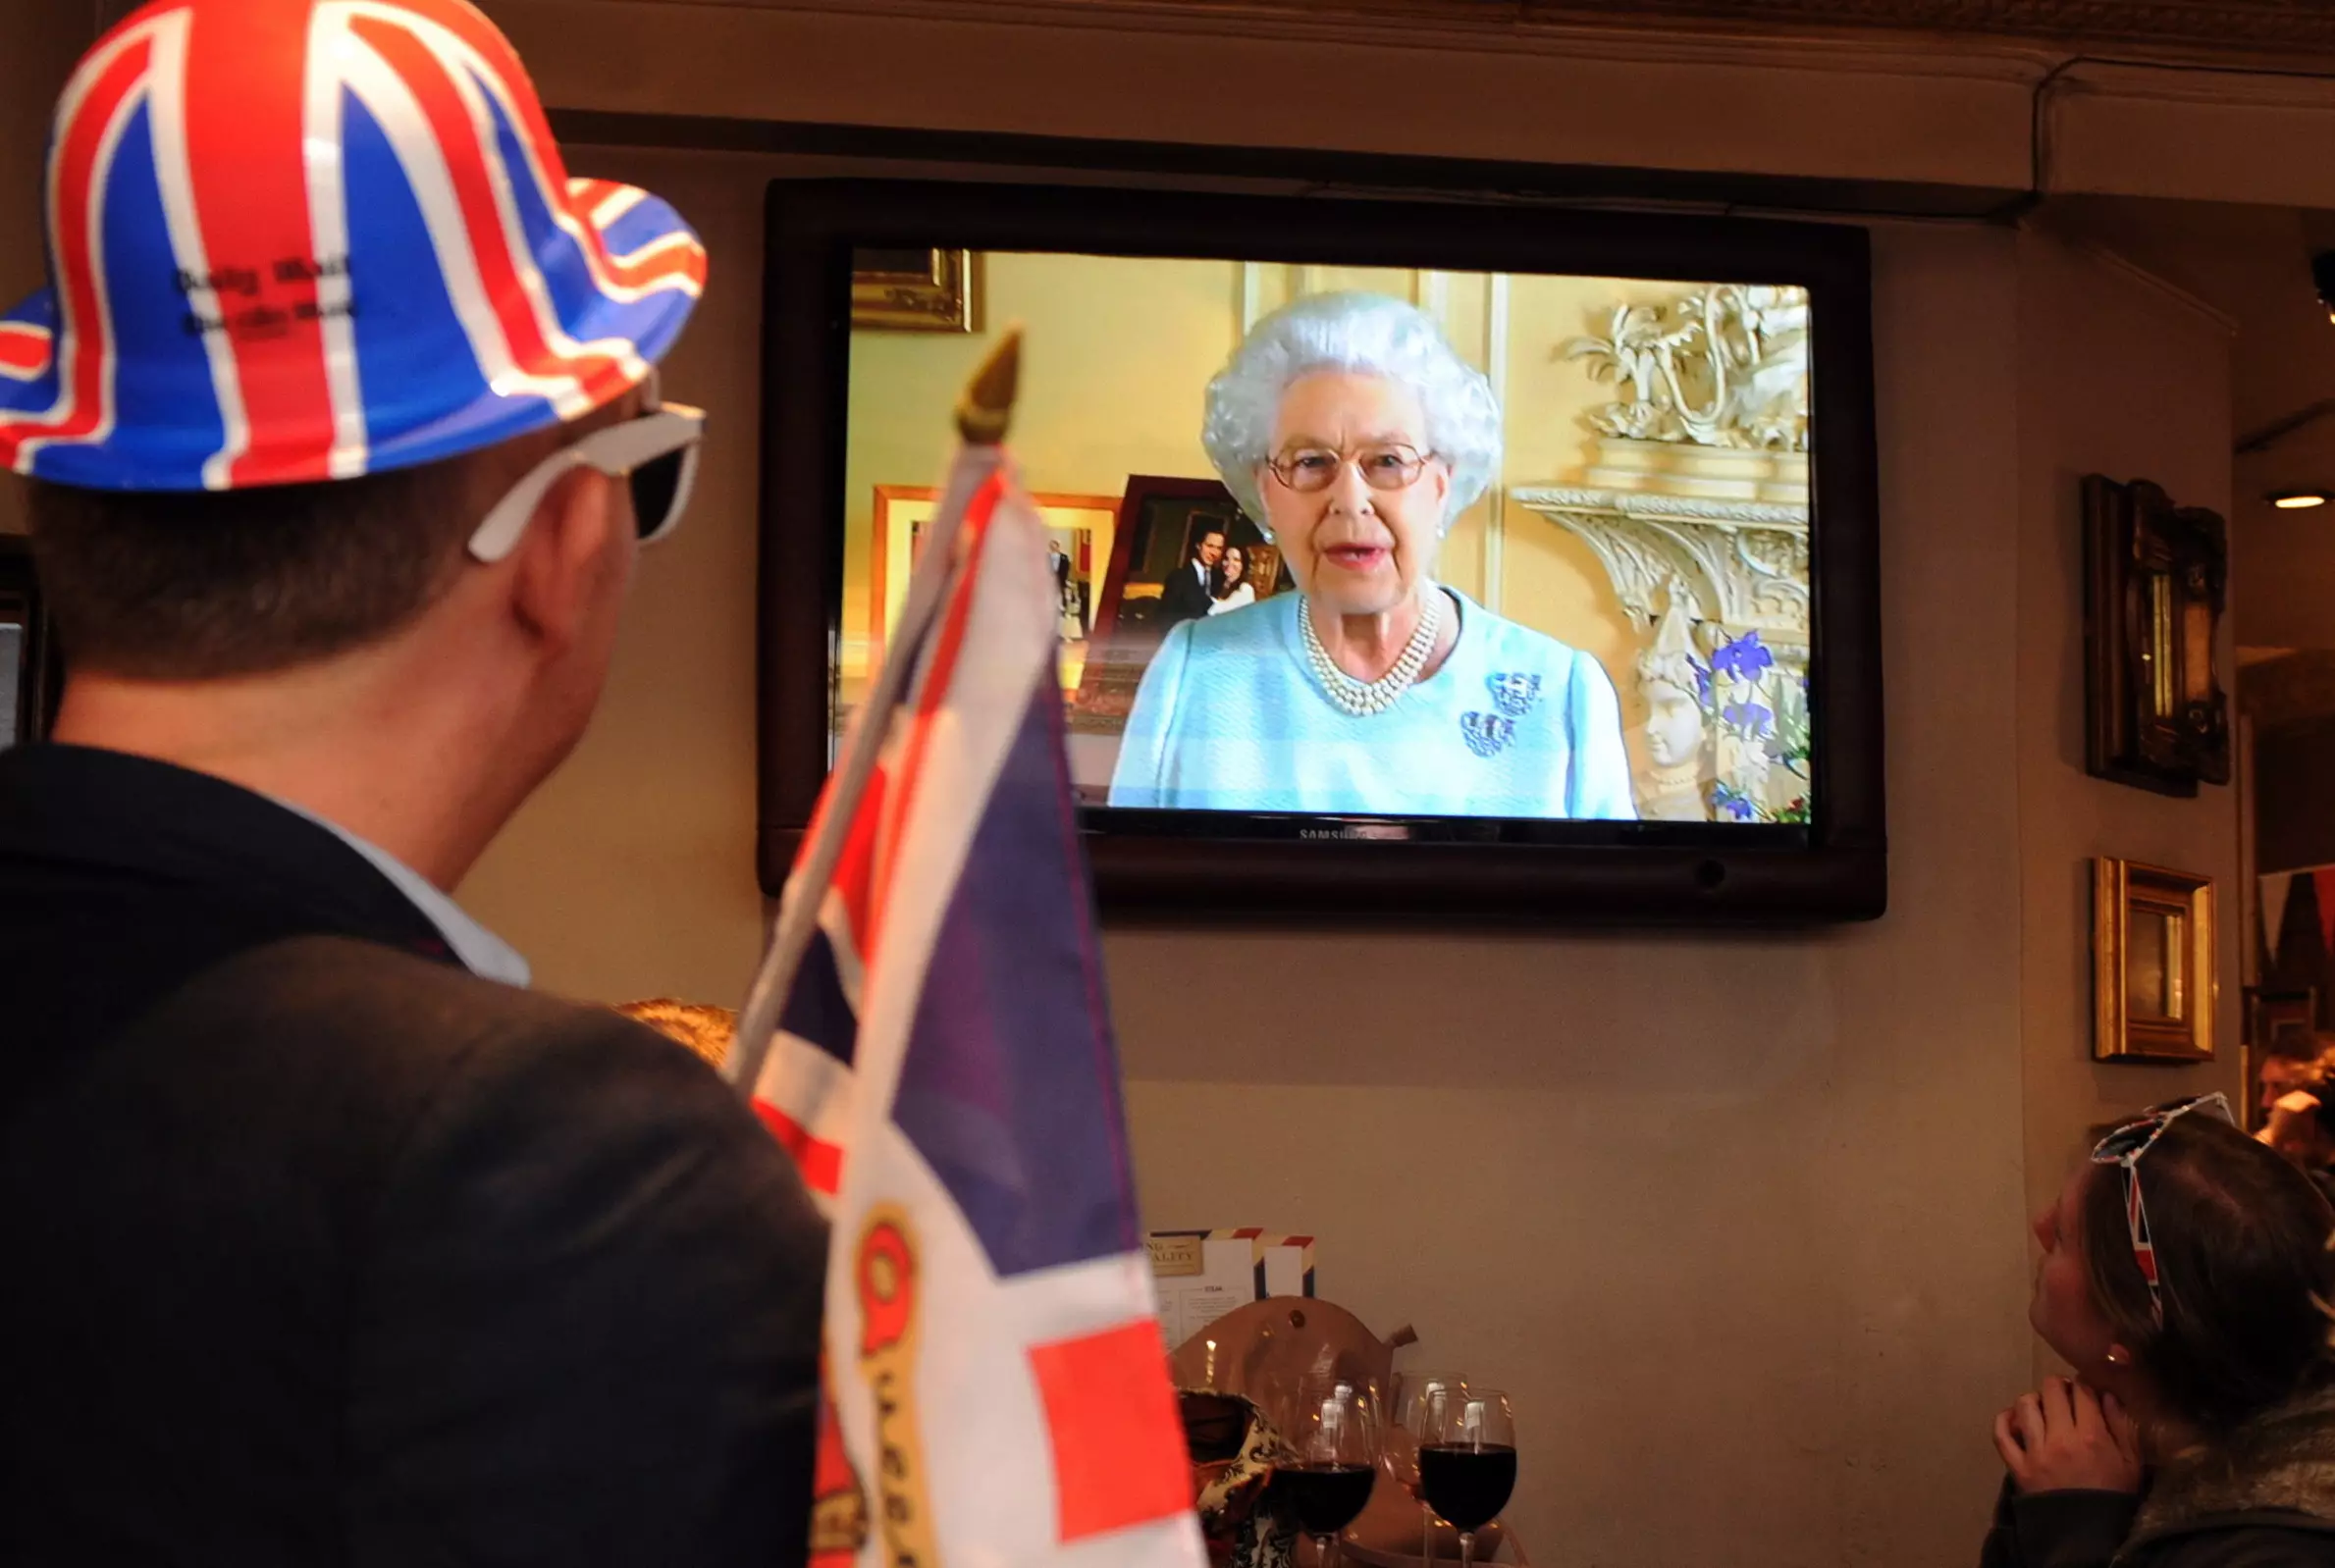 Traditionally people tune in to watch The Queen on Christmas Day.